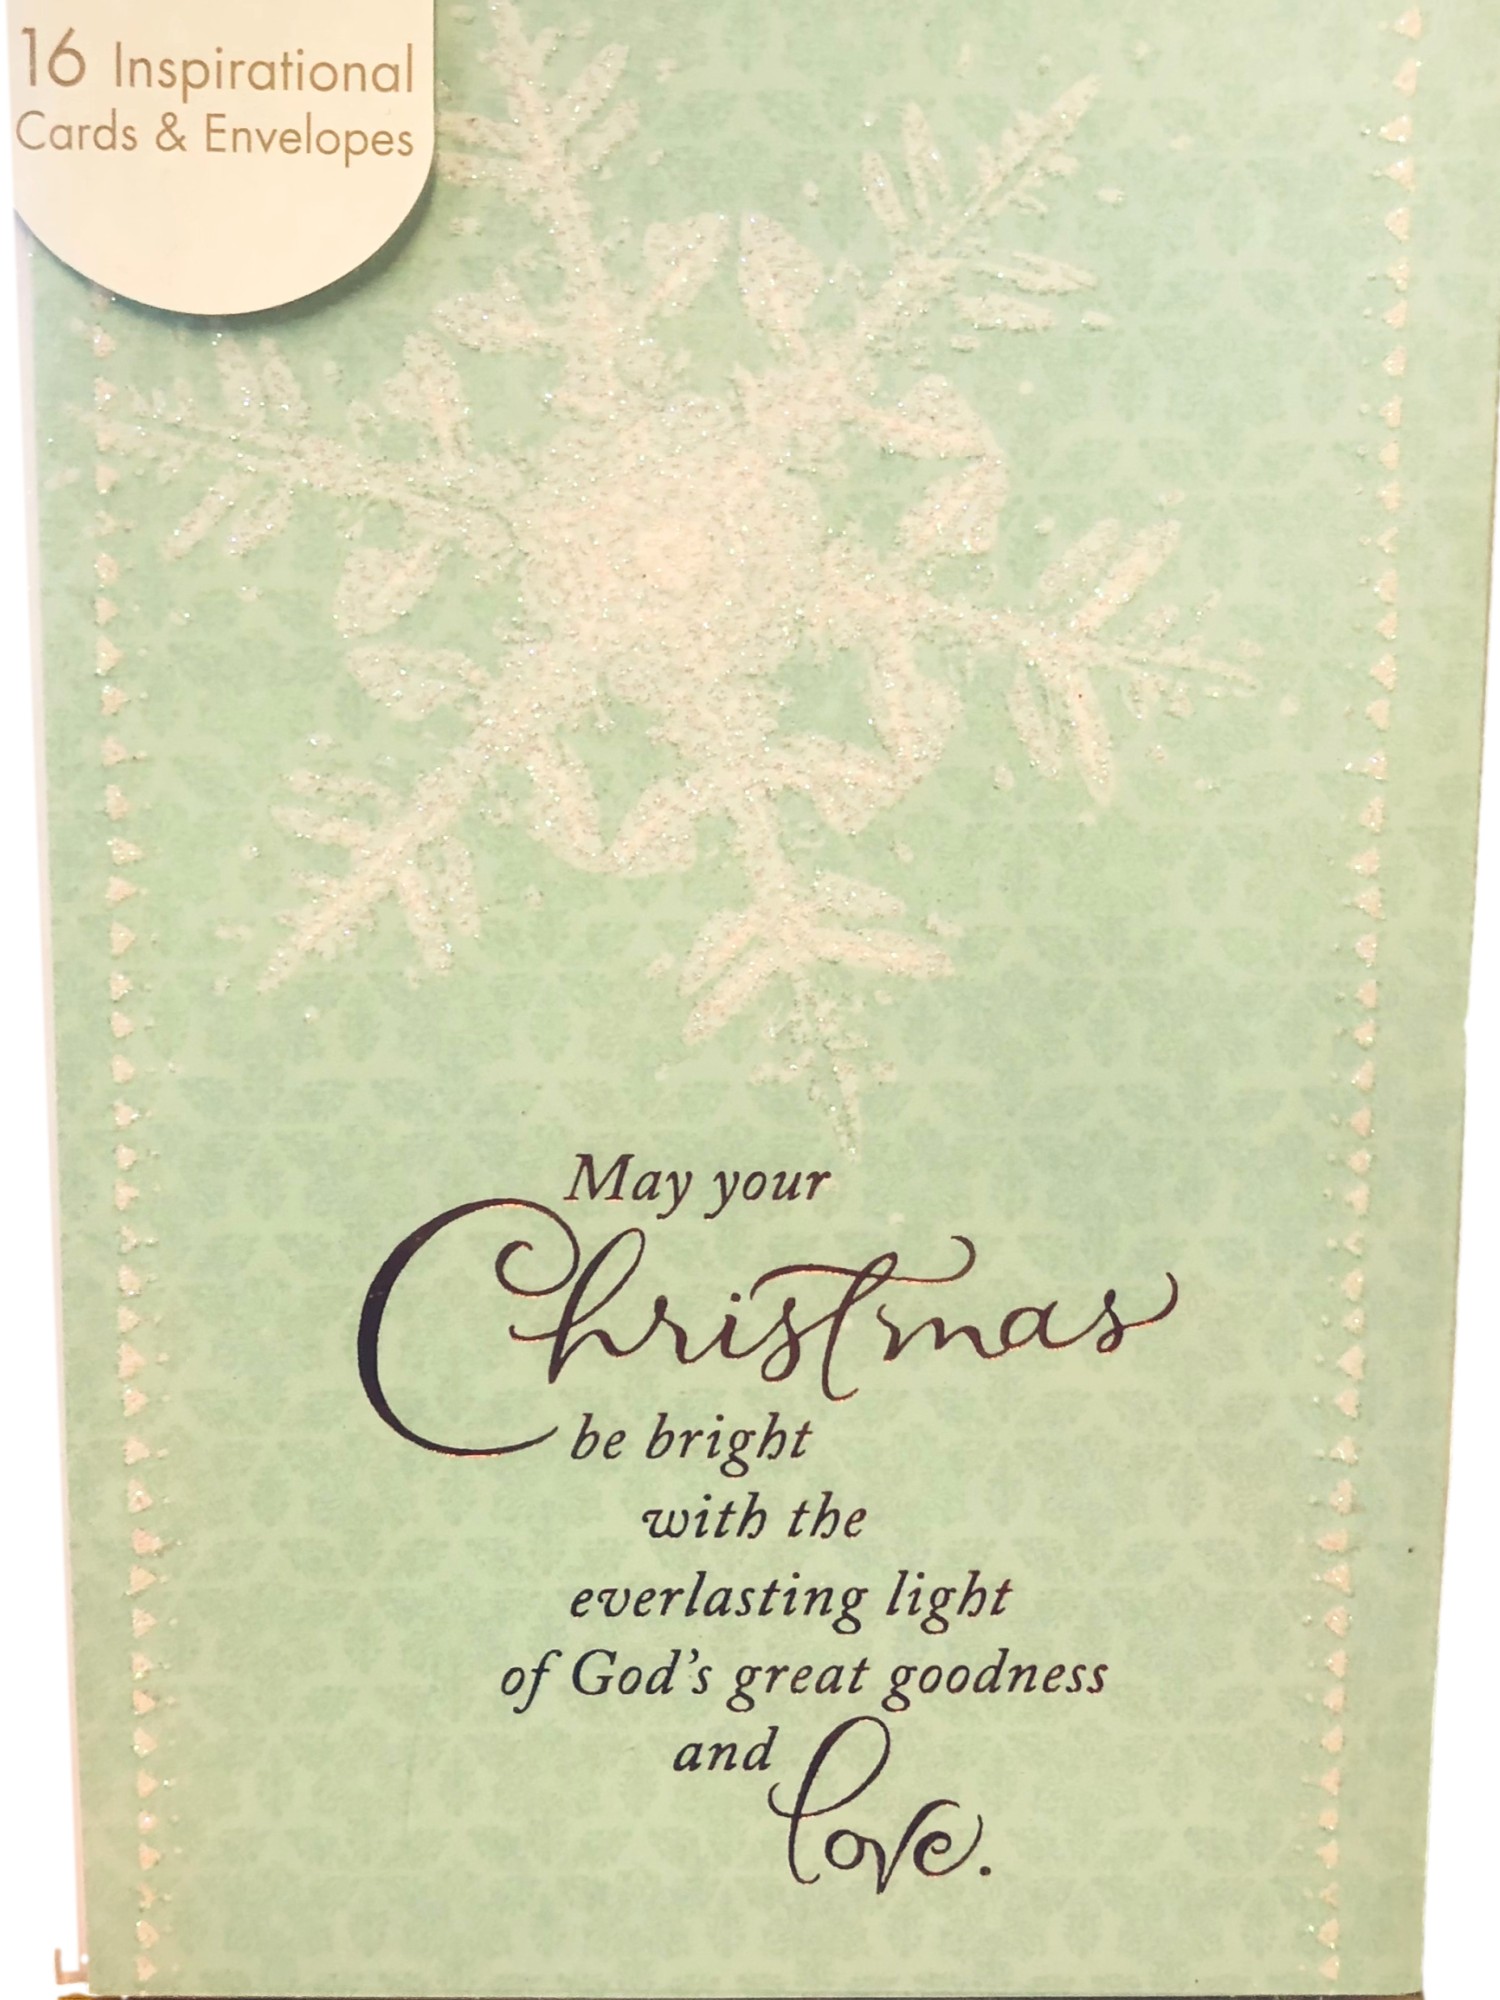 Day Spring cards Dayspring 16 Snowflake Everlasting Light Christian Holiday Christmas Cards